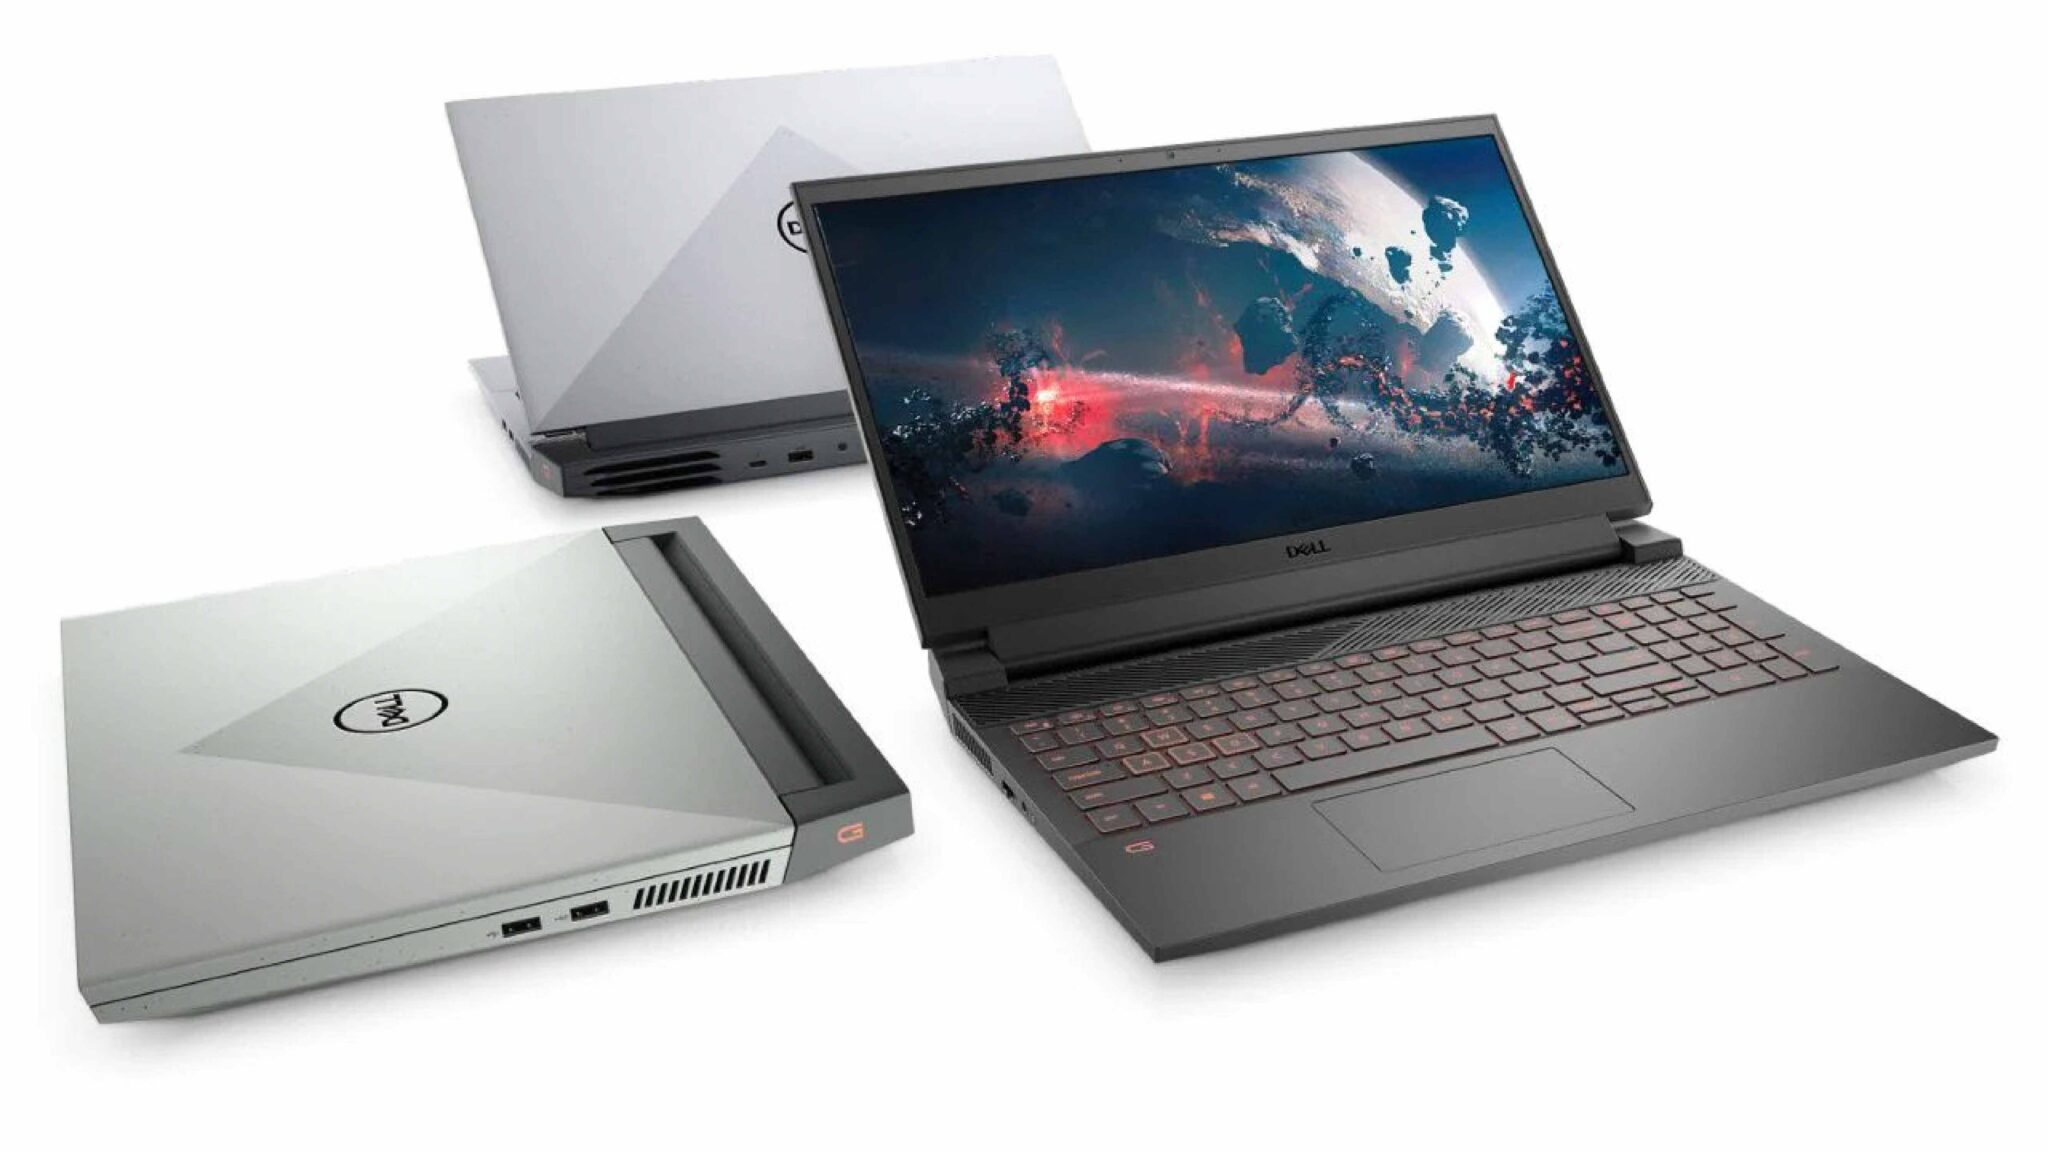 Dell G16 Gaming laptop launched with 12thgen Intel processor and 1610